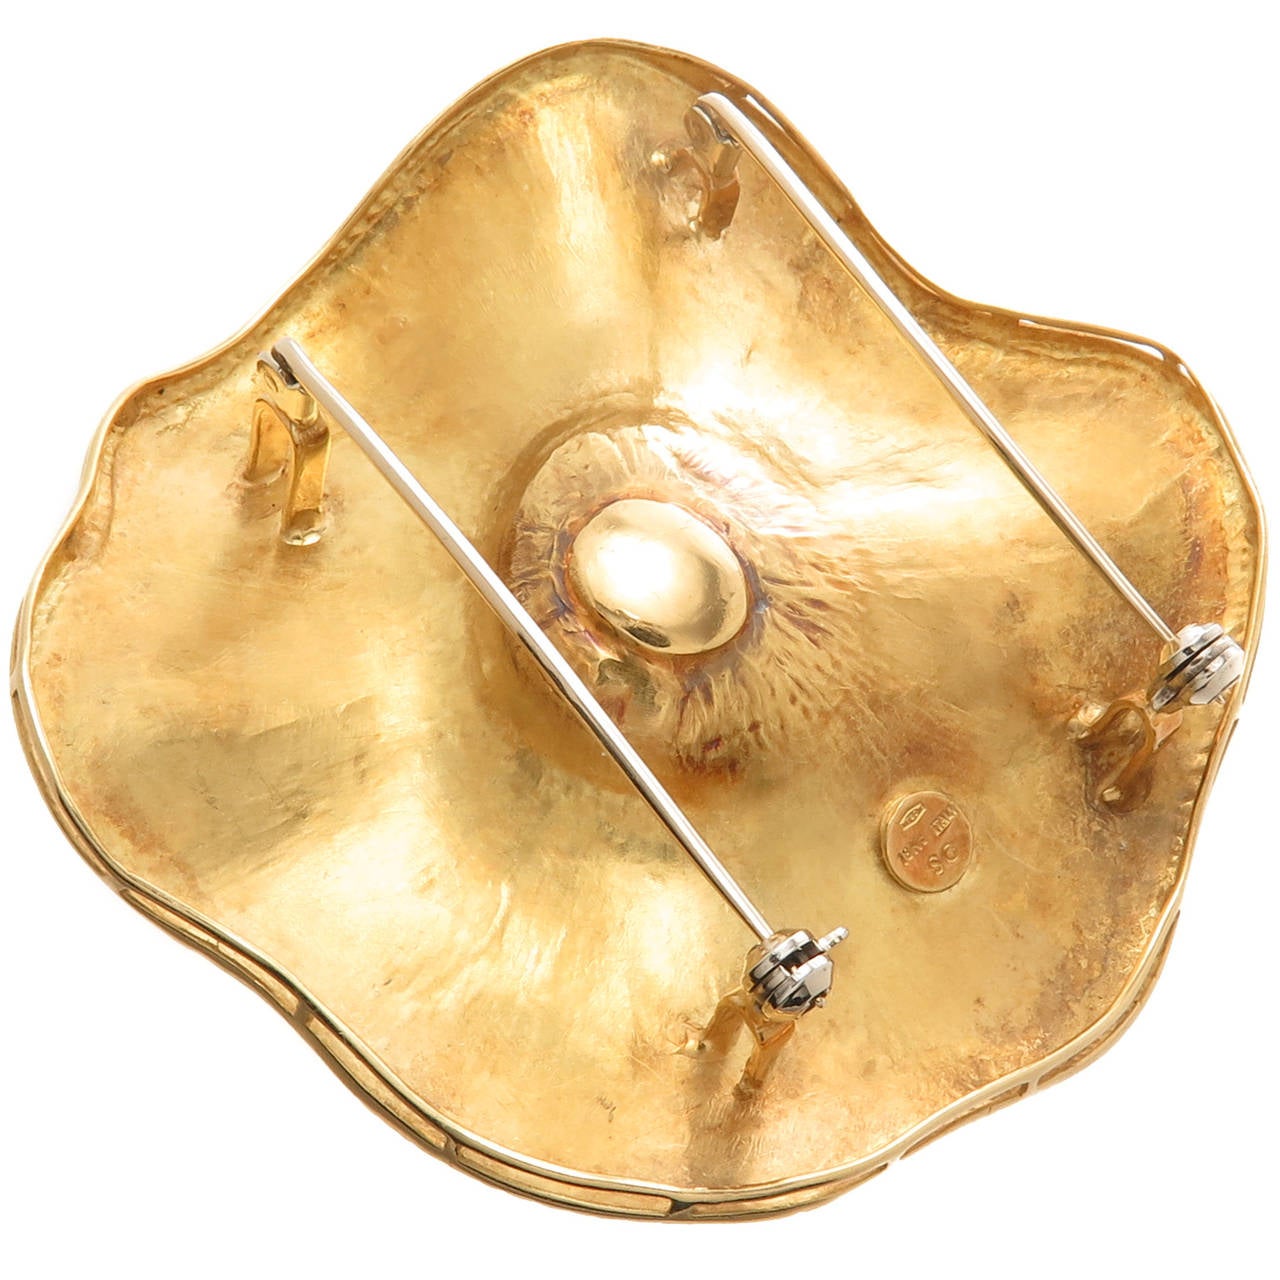 Circa 1990 18K Yellow Gold Brooch by Seiden Gang, in a Petaled flower design this is wonderfully hand textured, centrally set with a Pearl measuring 13.5 M.M.   Measuring 2 1/2 Inch in Diameter.